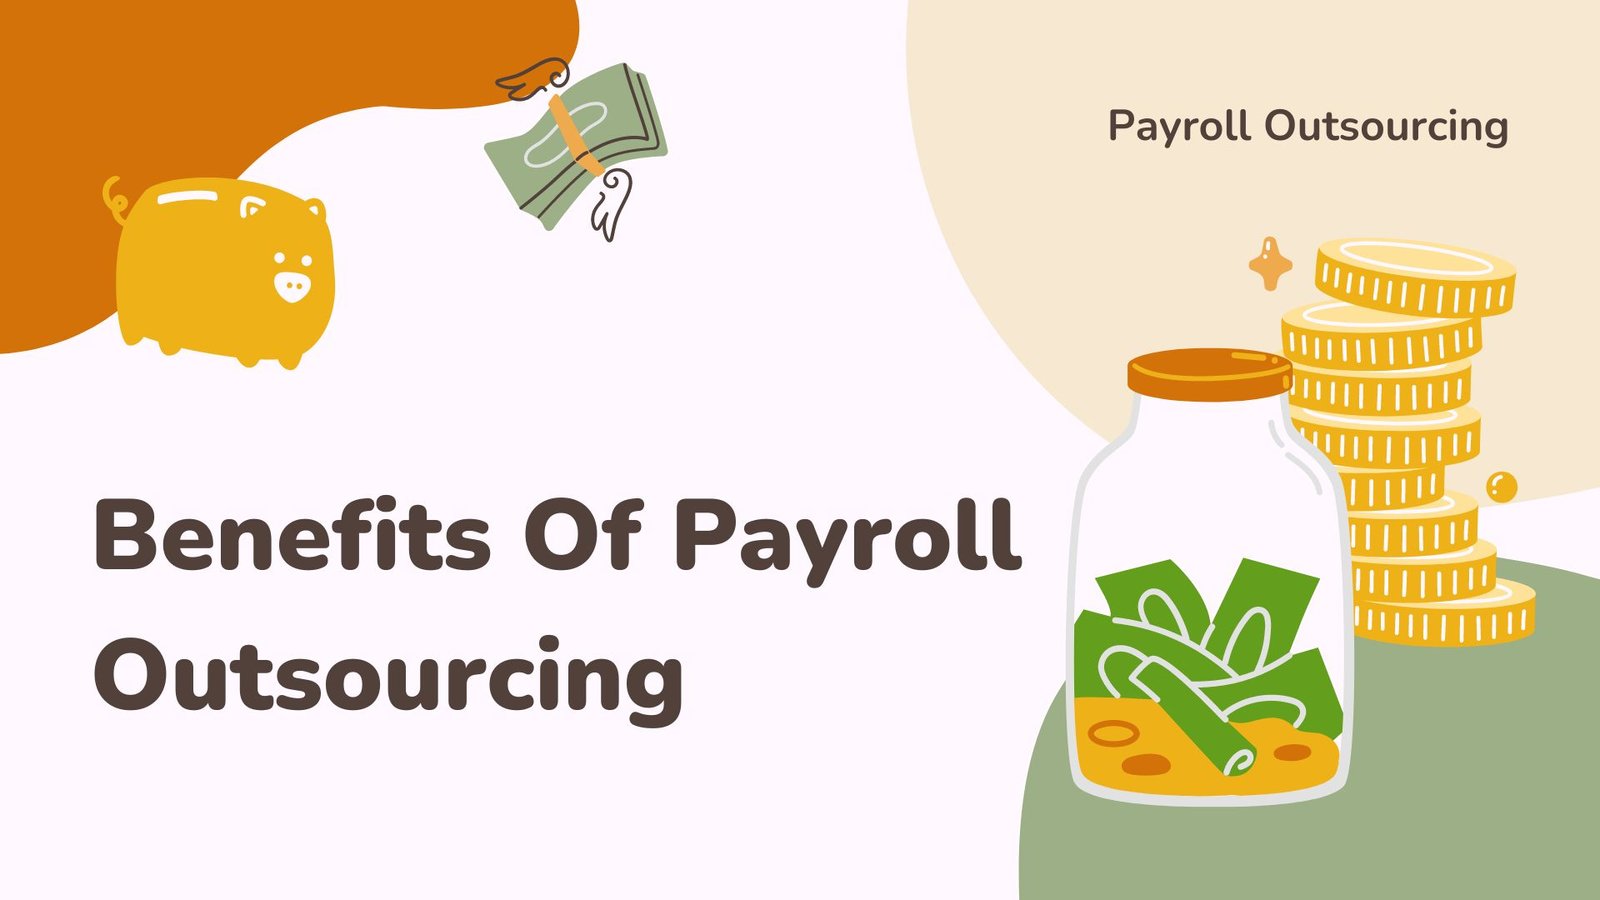 Benefits Of Payroll Outsourcing